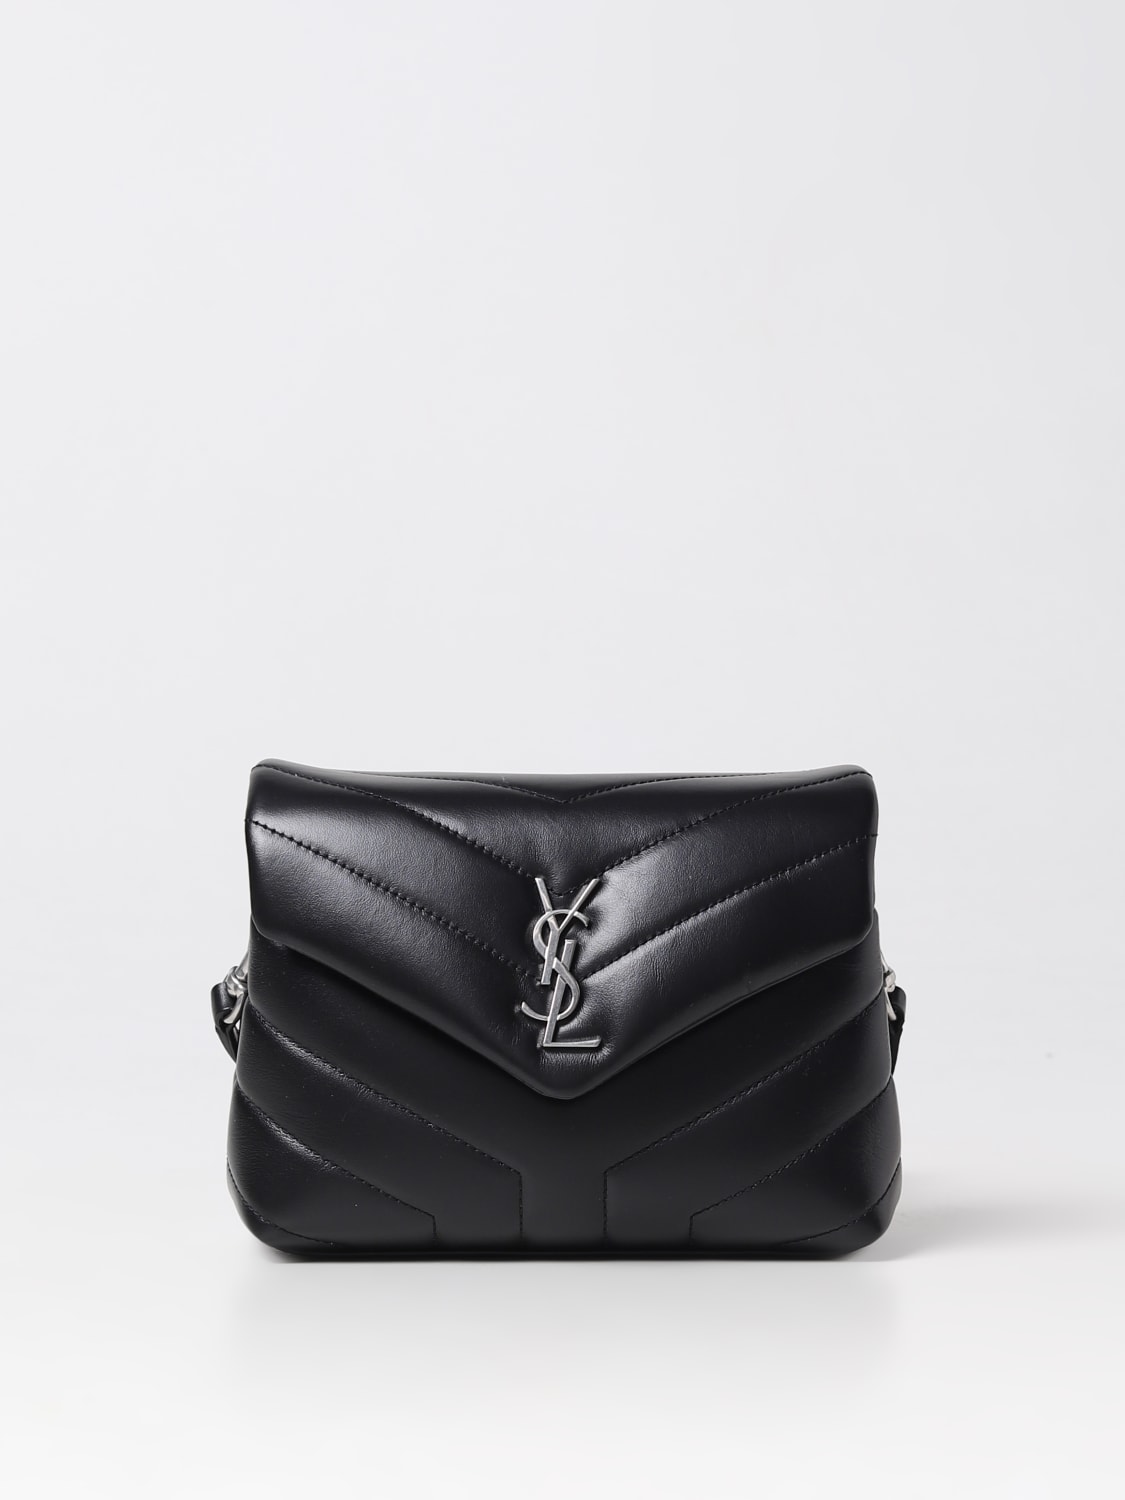 SAINT LAURENT: Toy Loulou bag in quilted leather - Black | Saint